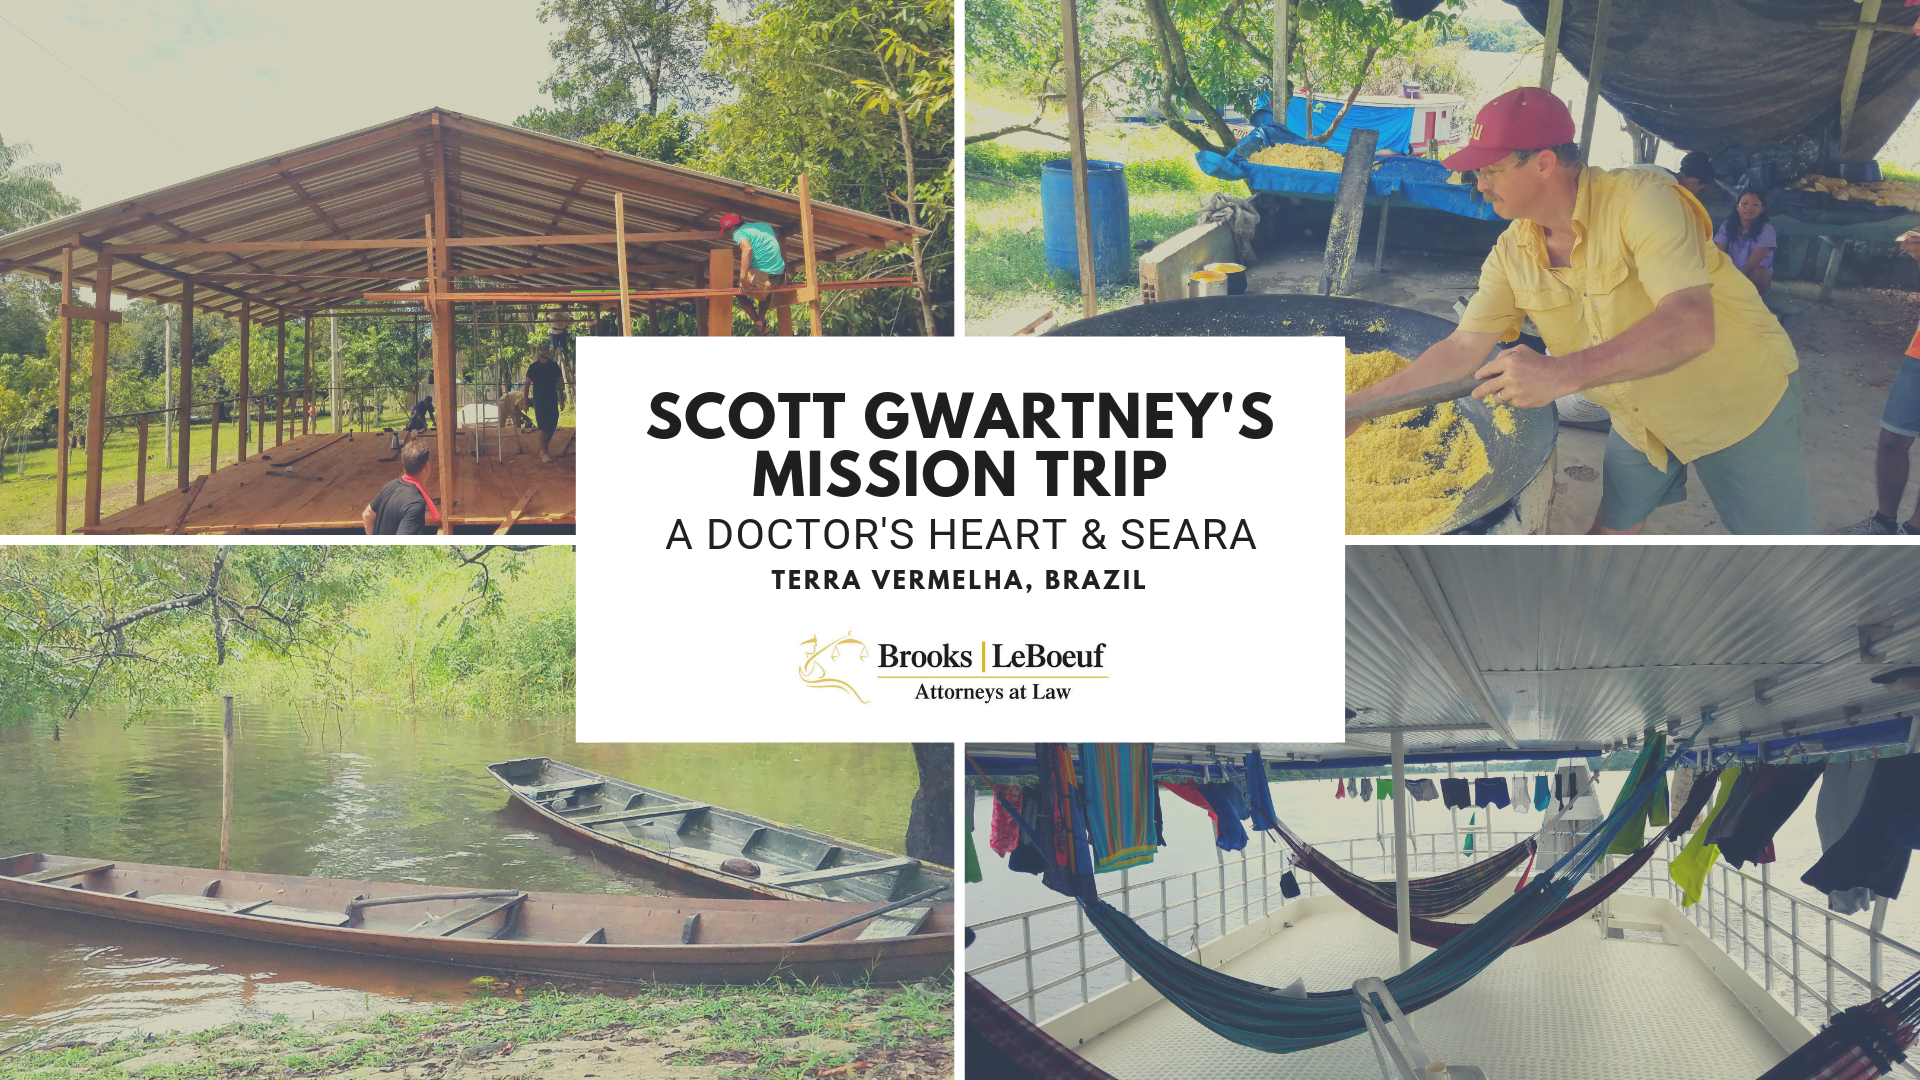 Learn More About Scott Gwartney’s Mission Trip to Brazil